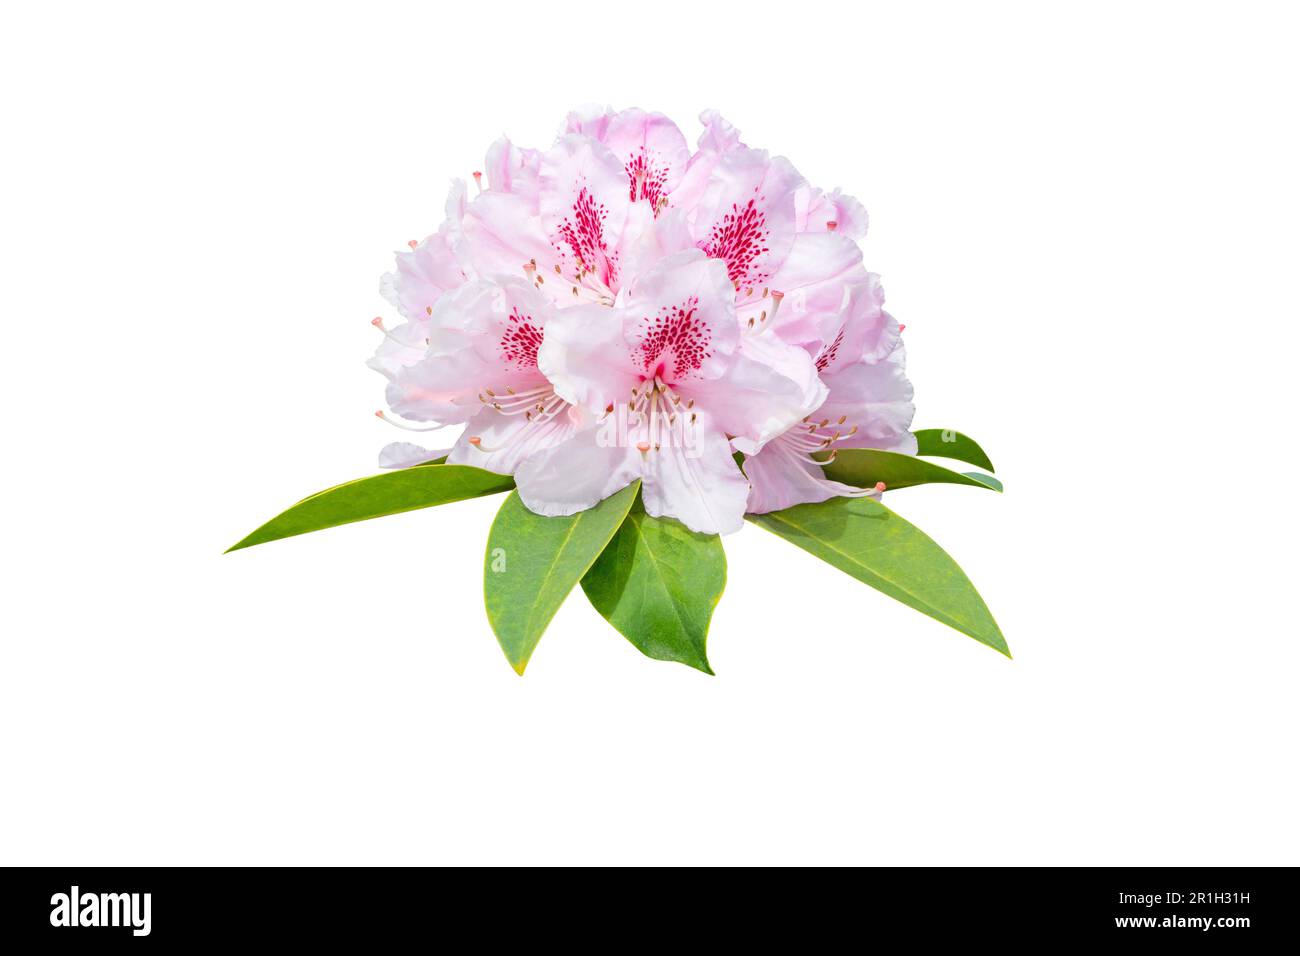 Rhododendron pale pink flowers and leaves isolated on white Stock Photo